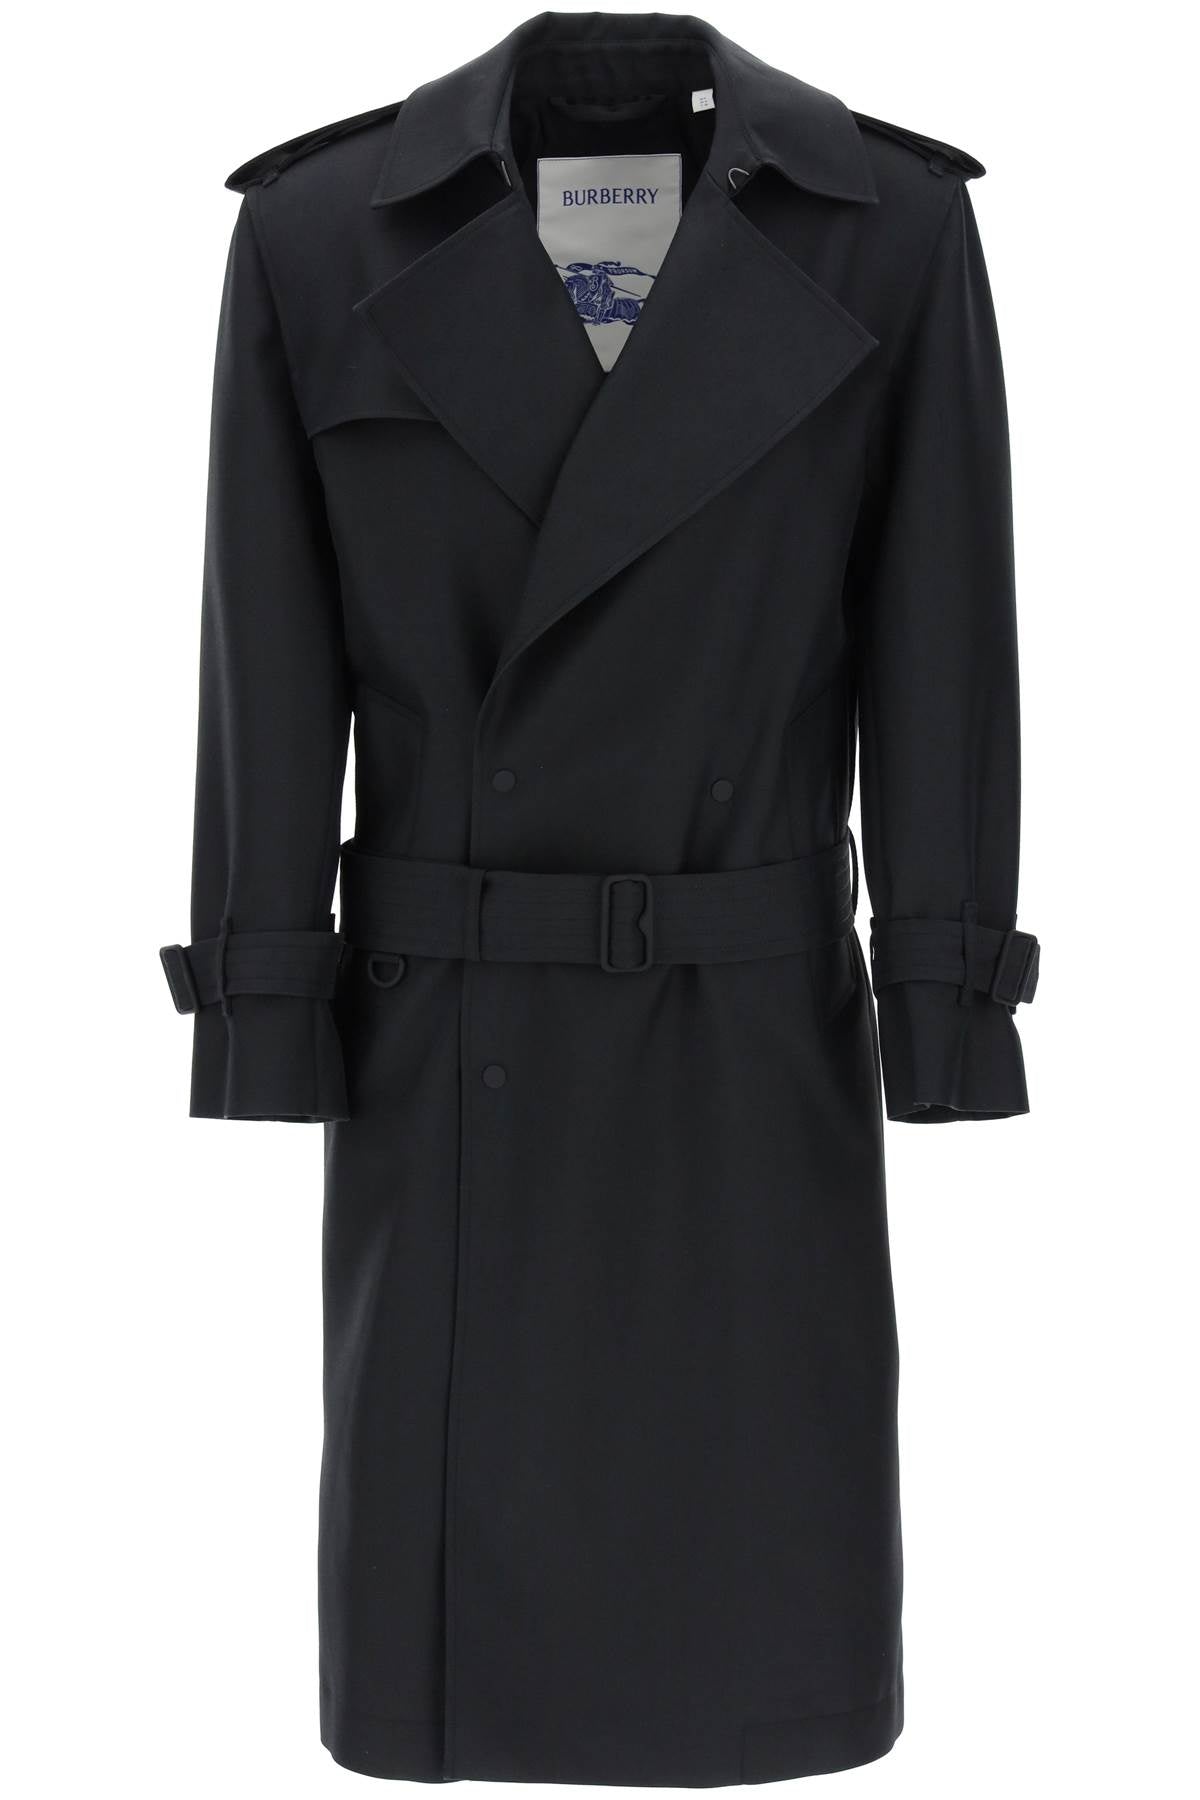 Burberry double-breasted silk twill trench coat-women > clothing > jackets-Burberry-Urbanheer